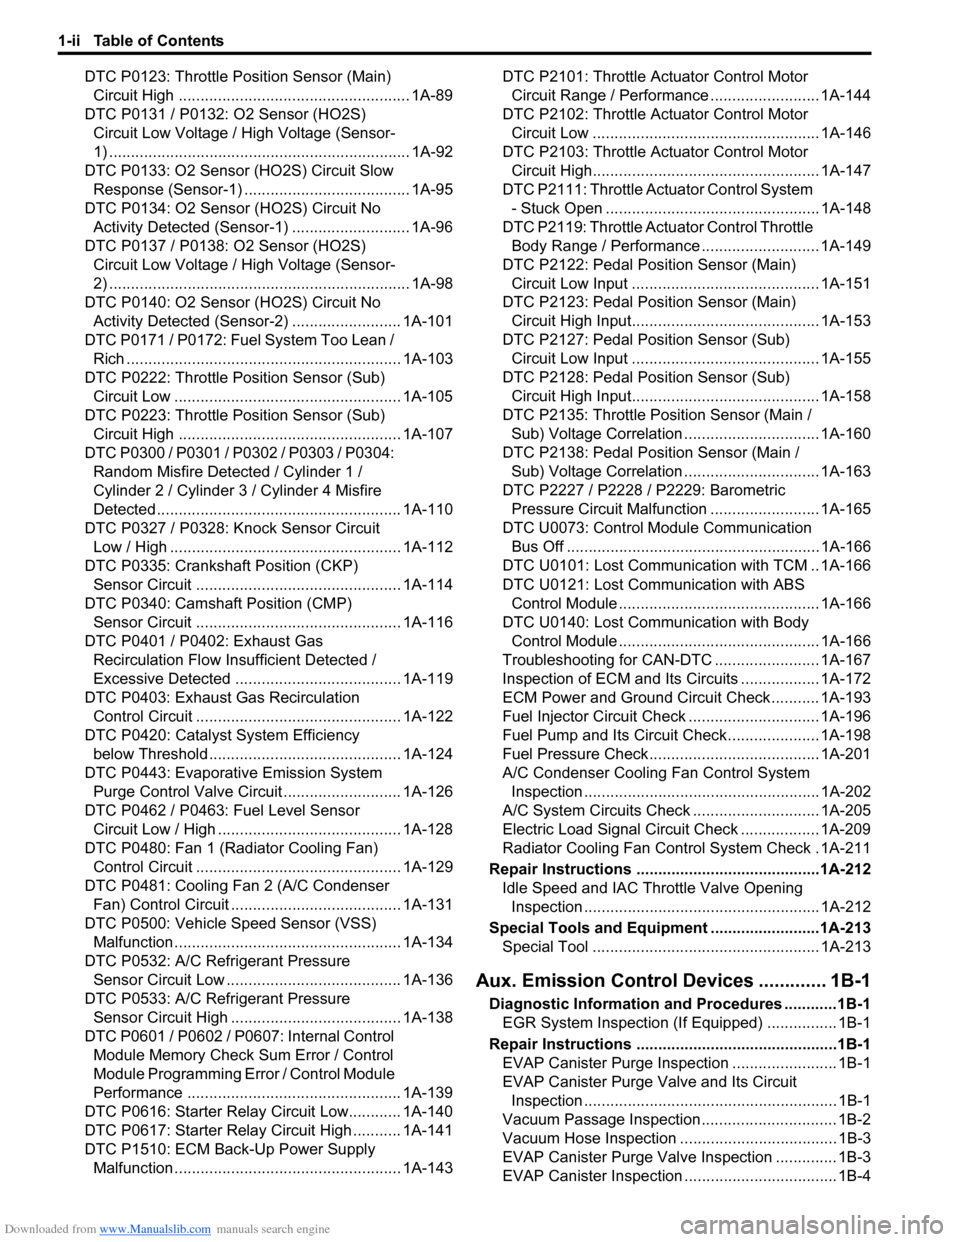 SUZUKI SX4 2006 1.G Service Workshop Manual Downloaded from www.Manualslib.com manuals search engine 1-ii Table of Contents
DTC P0123: Throttle Position Sensor (Main) 
Circuit High ..................................................... 1A-89
DTC